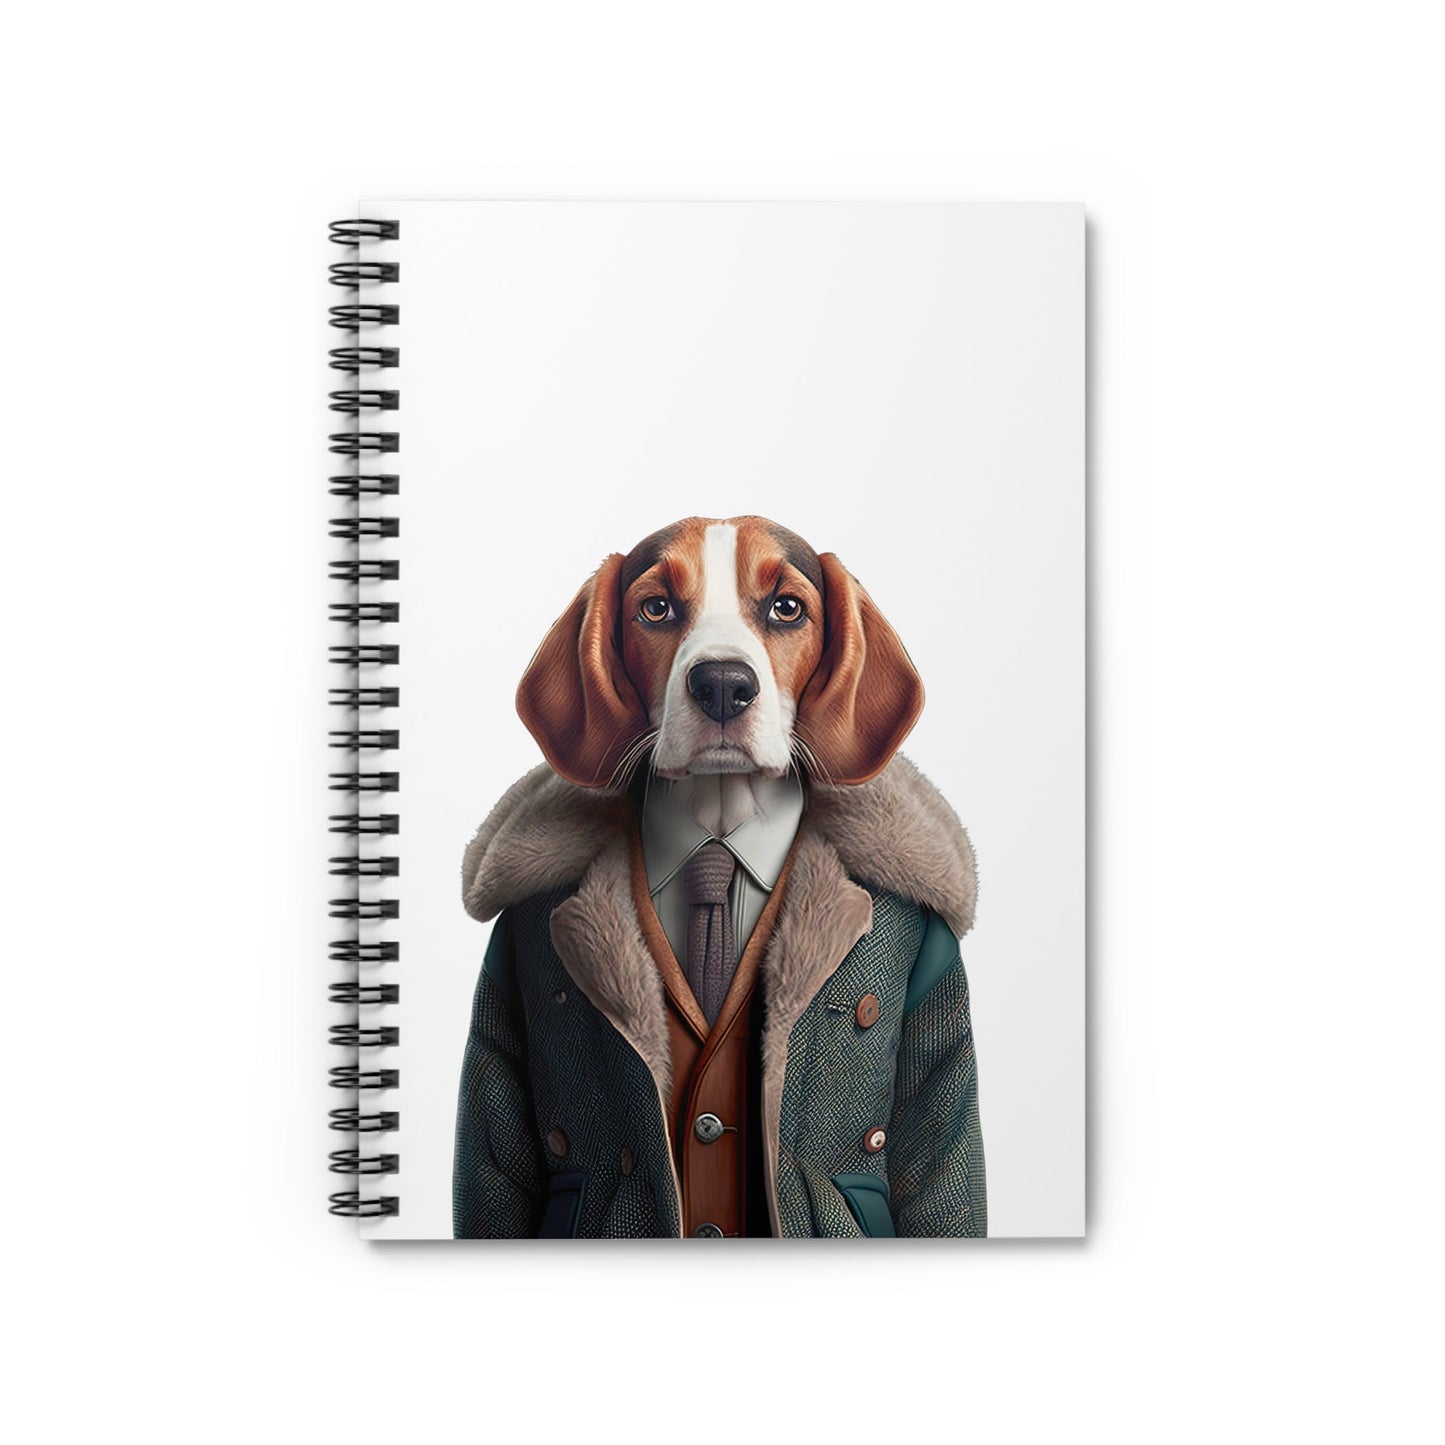 BUFORD : Spiral Notebook - Ruled Line - Shaggy Chic